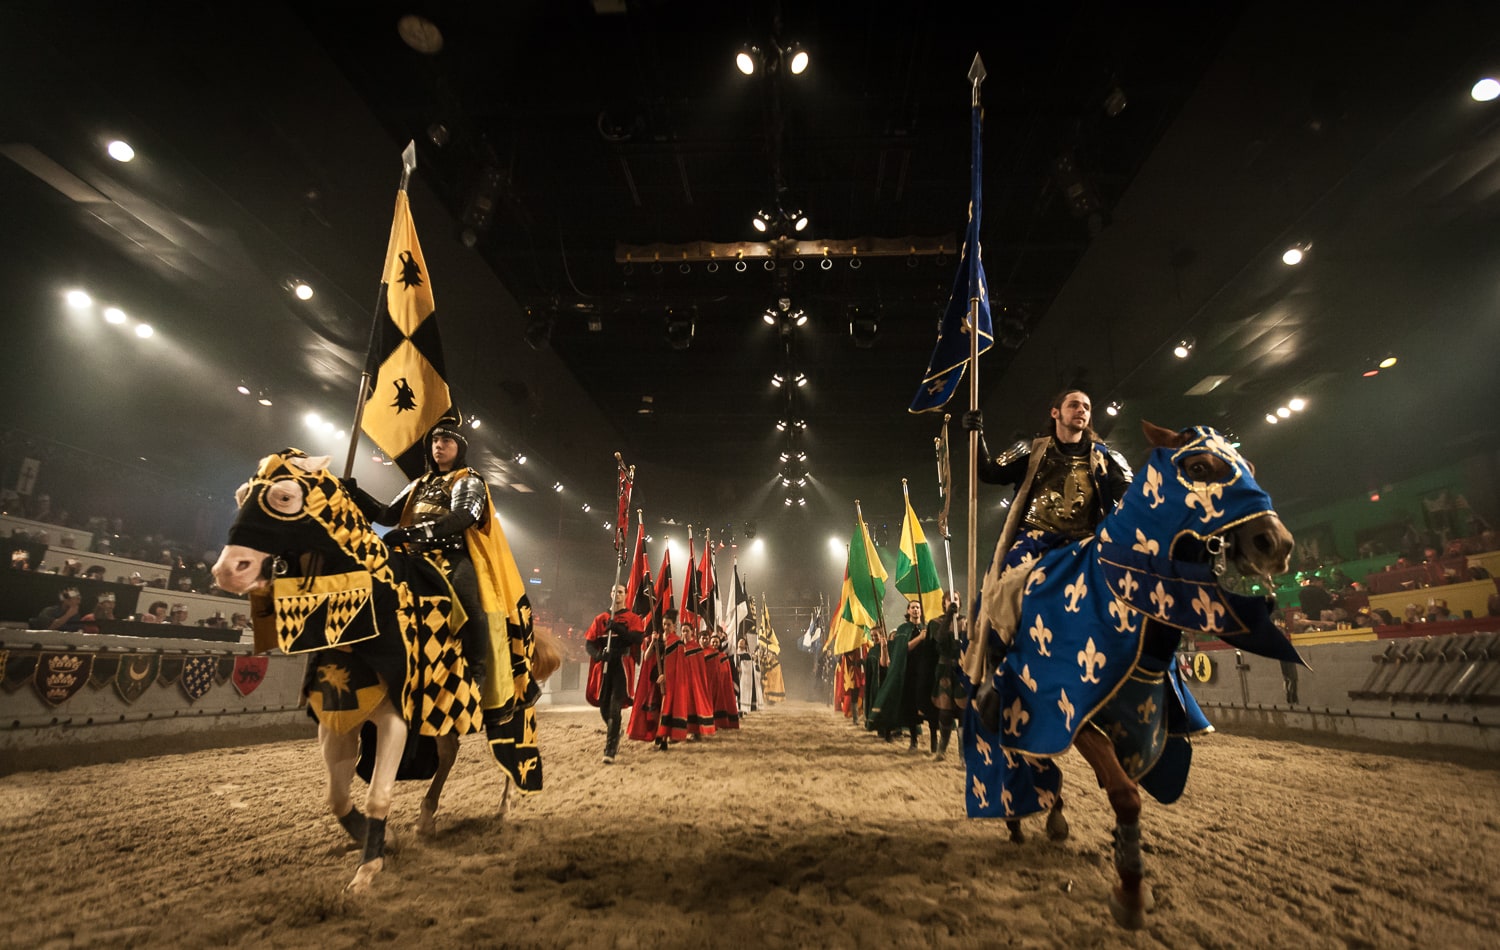 hotels near medieval times chicago